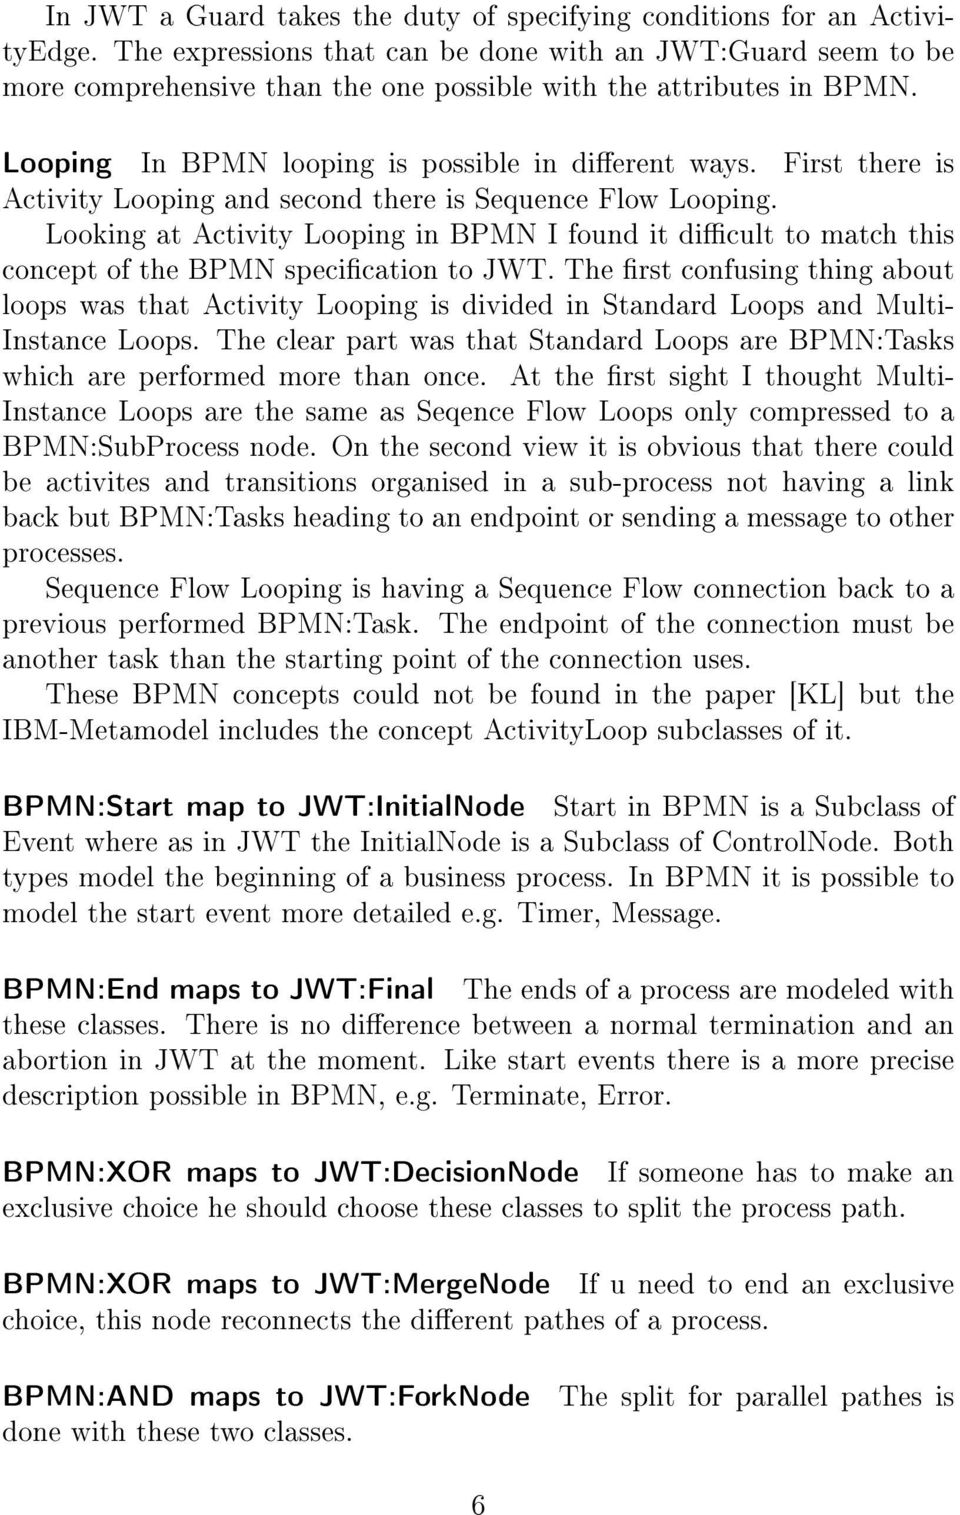 First there is Activity Looping and second there is Sequence Flow Looping. Looking at Activity Looping in BPMN I found it dicult to match this concept of the BPMN specication to JWT.